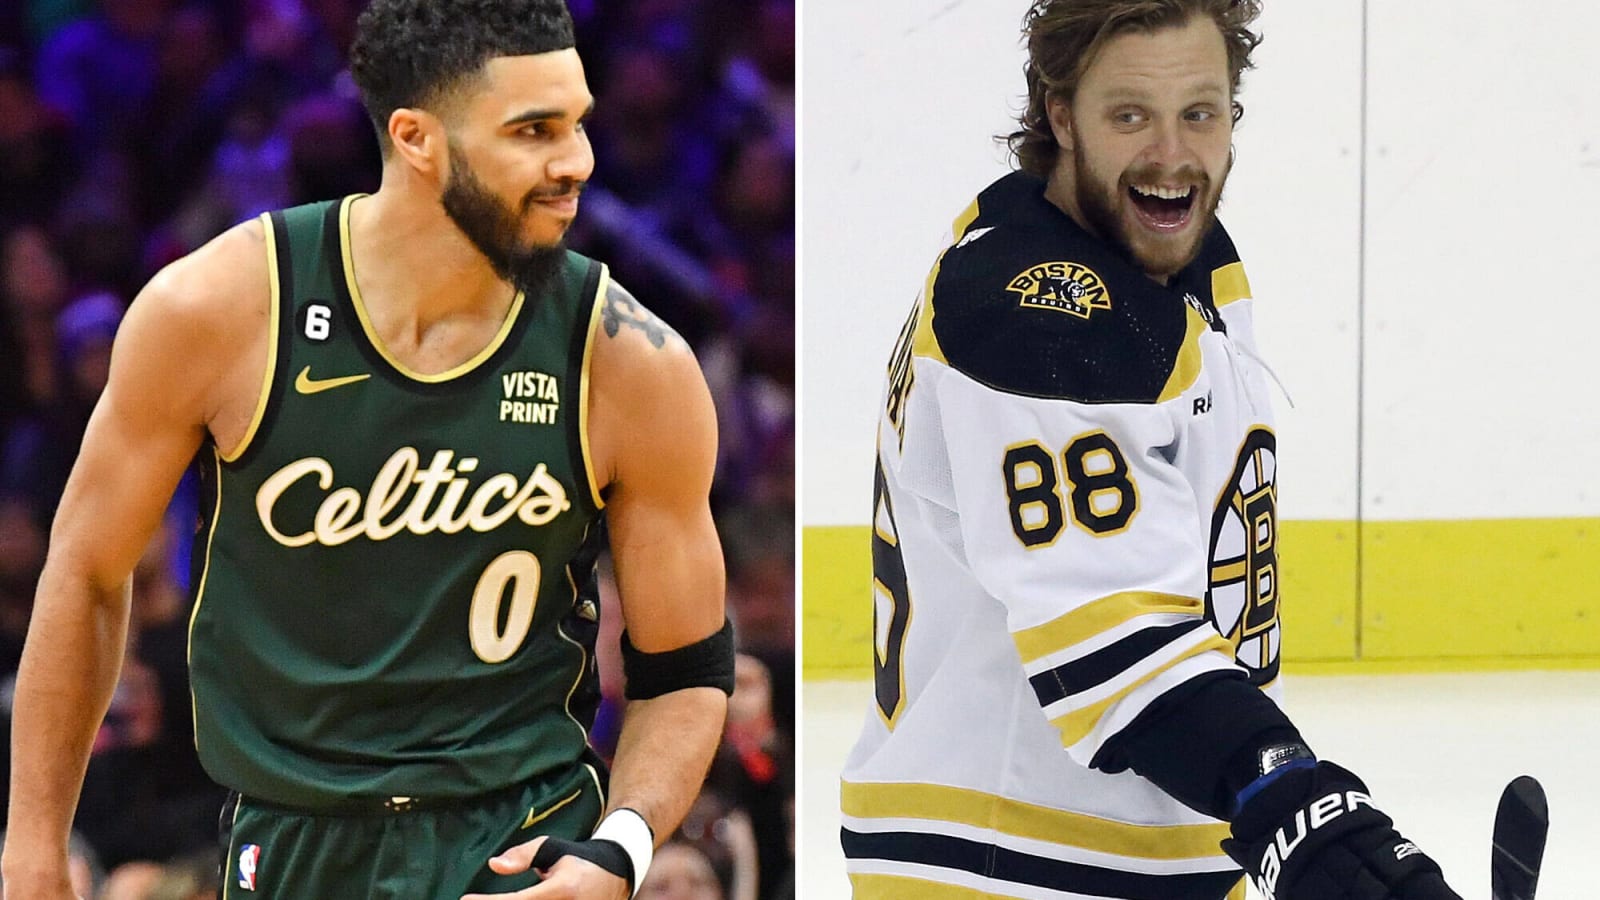 Why New Balance wanted the Bruins and Celtics nearby